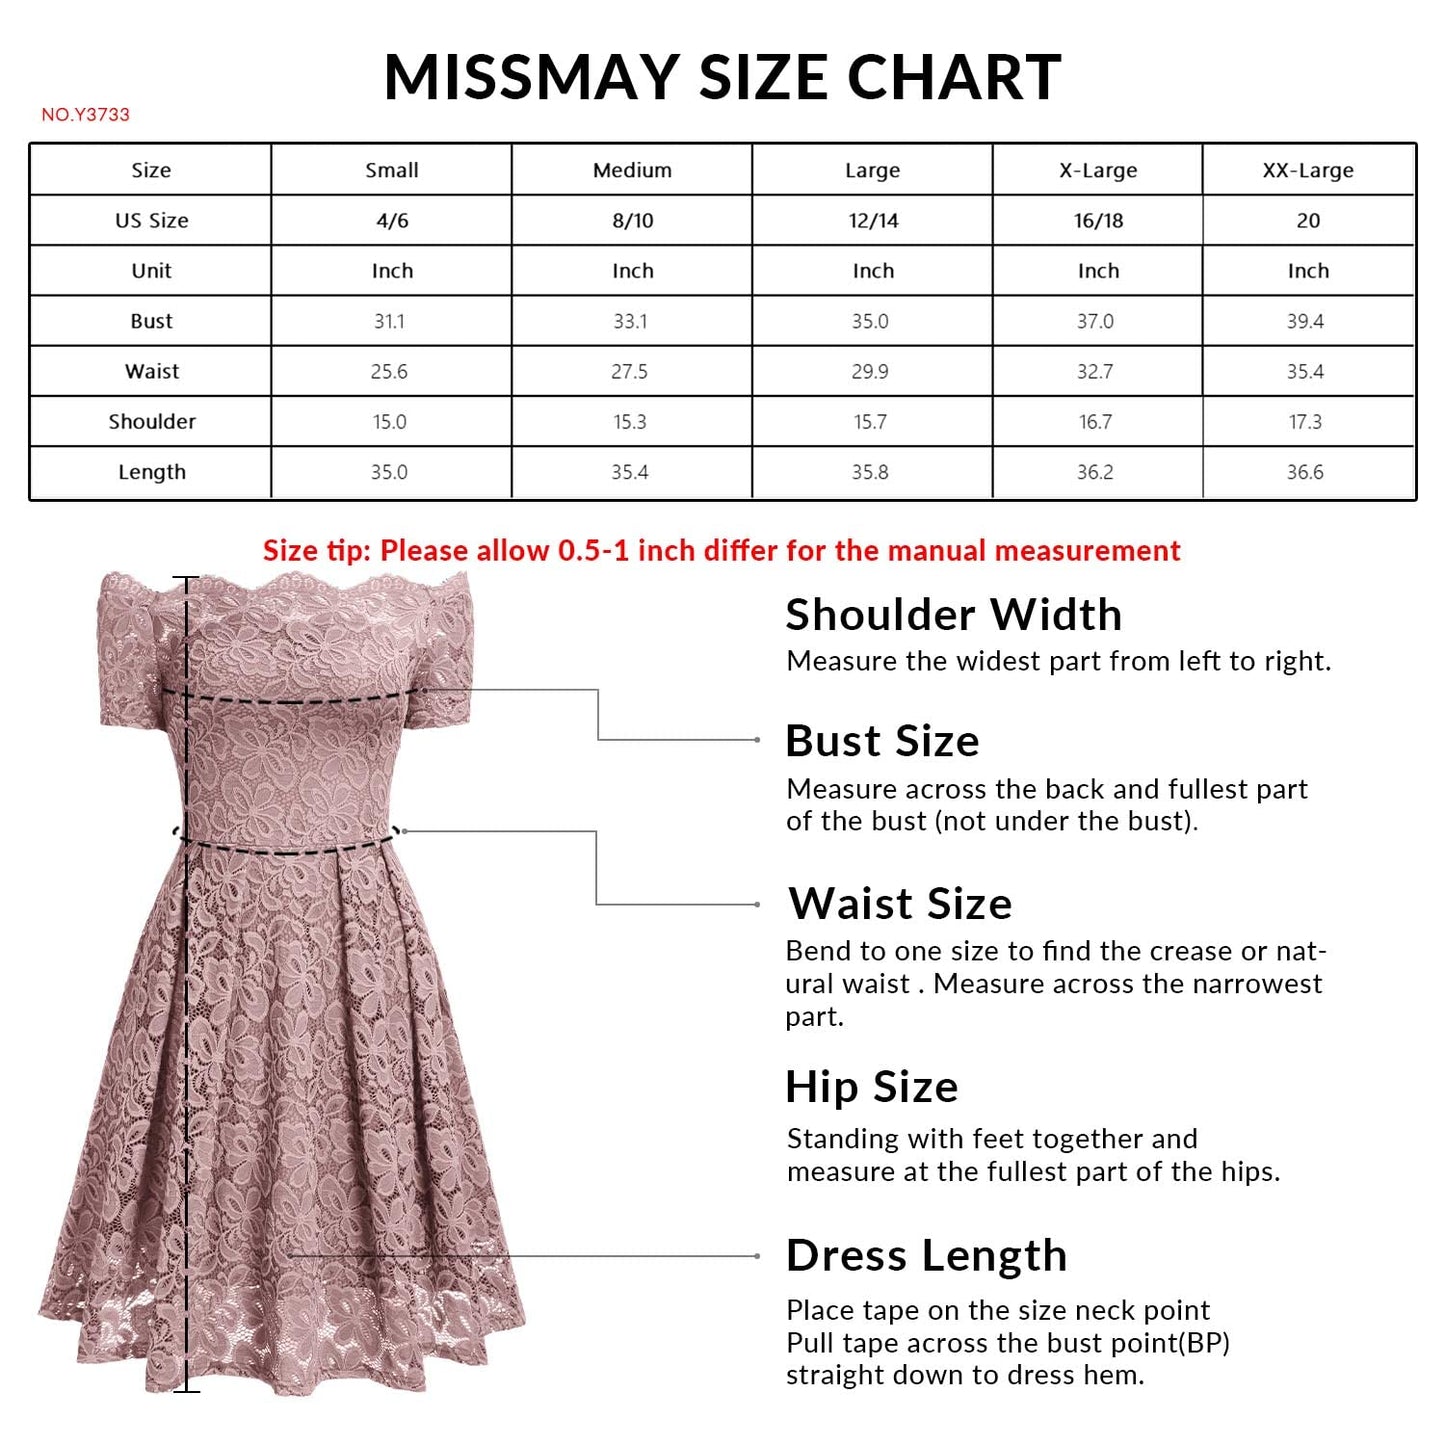 MISSMAY Women's Vintage Floral Lace Short Sleeve Boat Neck Cocktail Party Swing Dress (X-Large, Navy Blue)